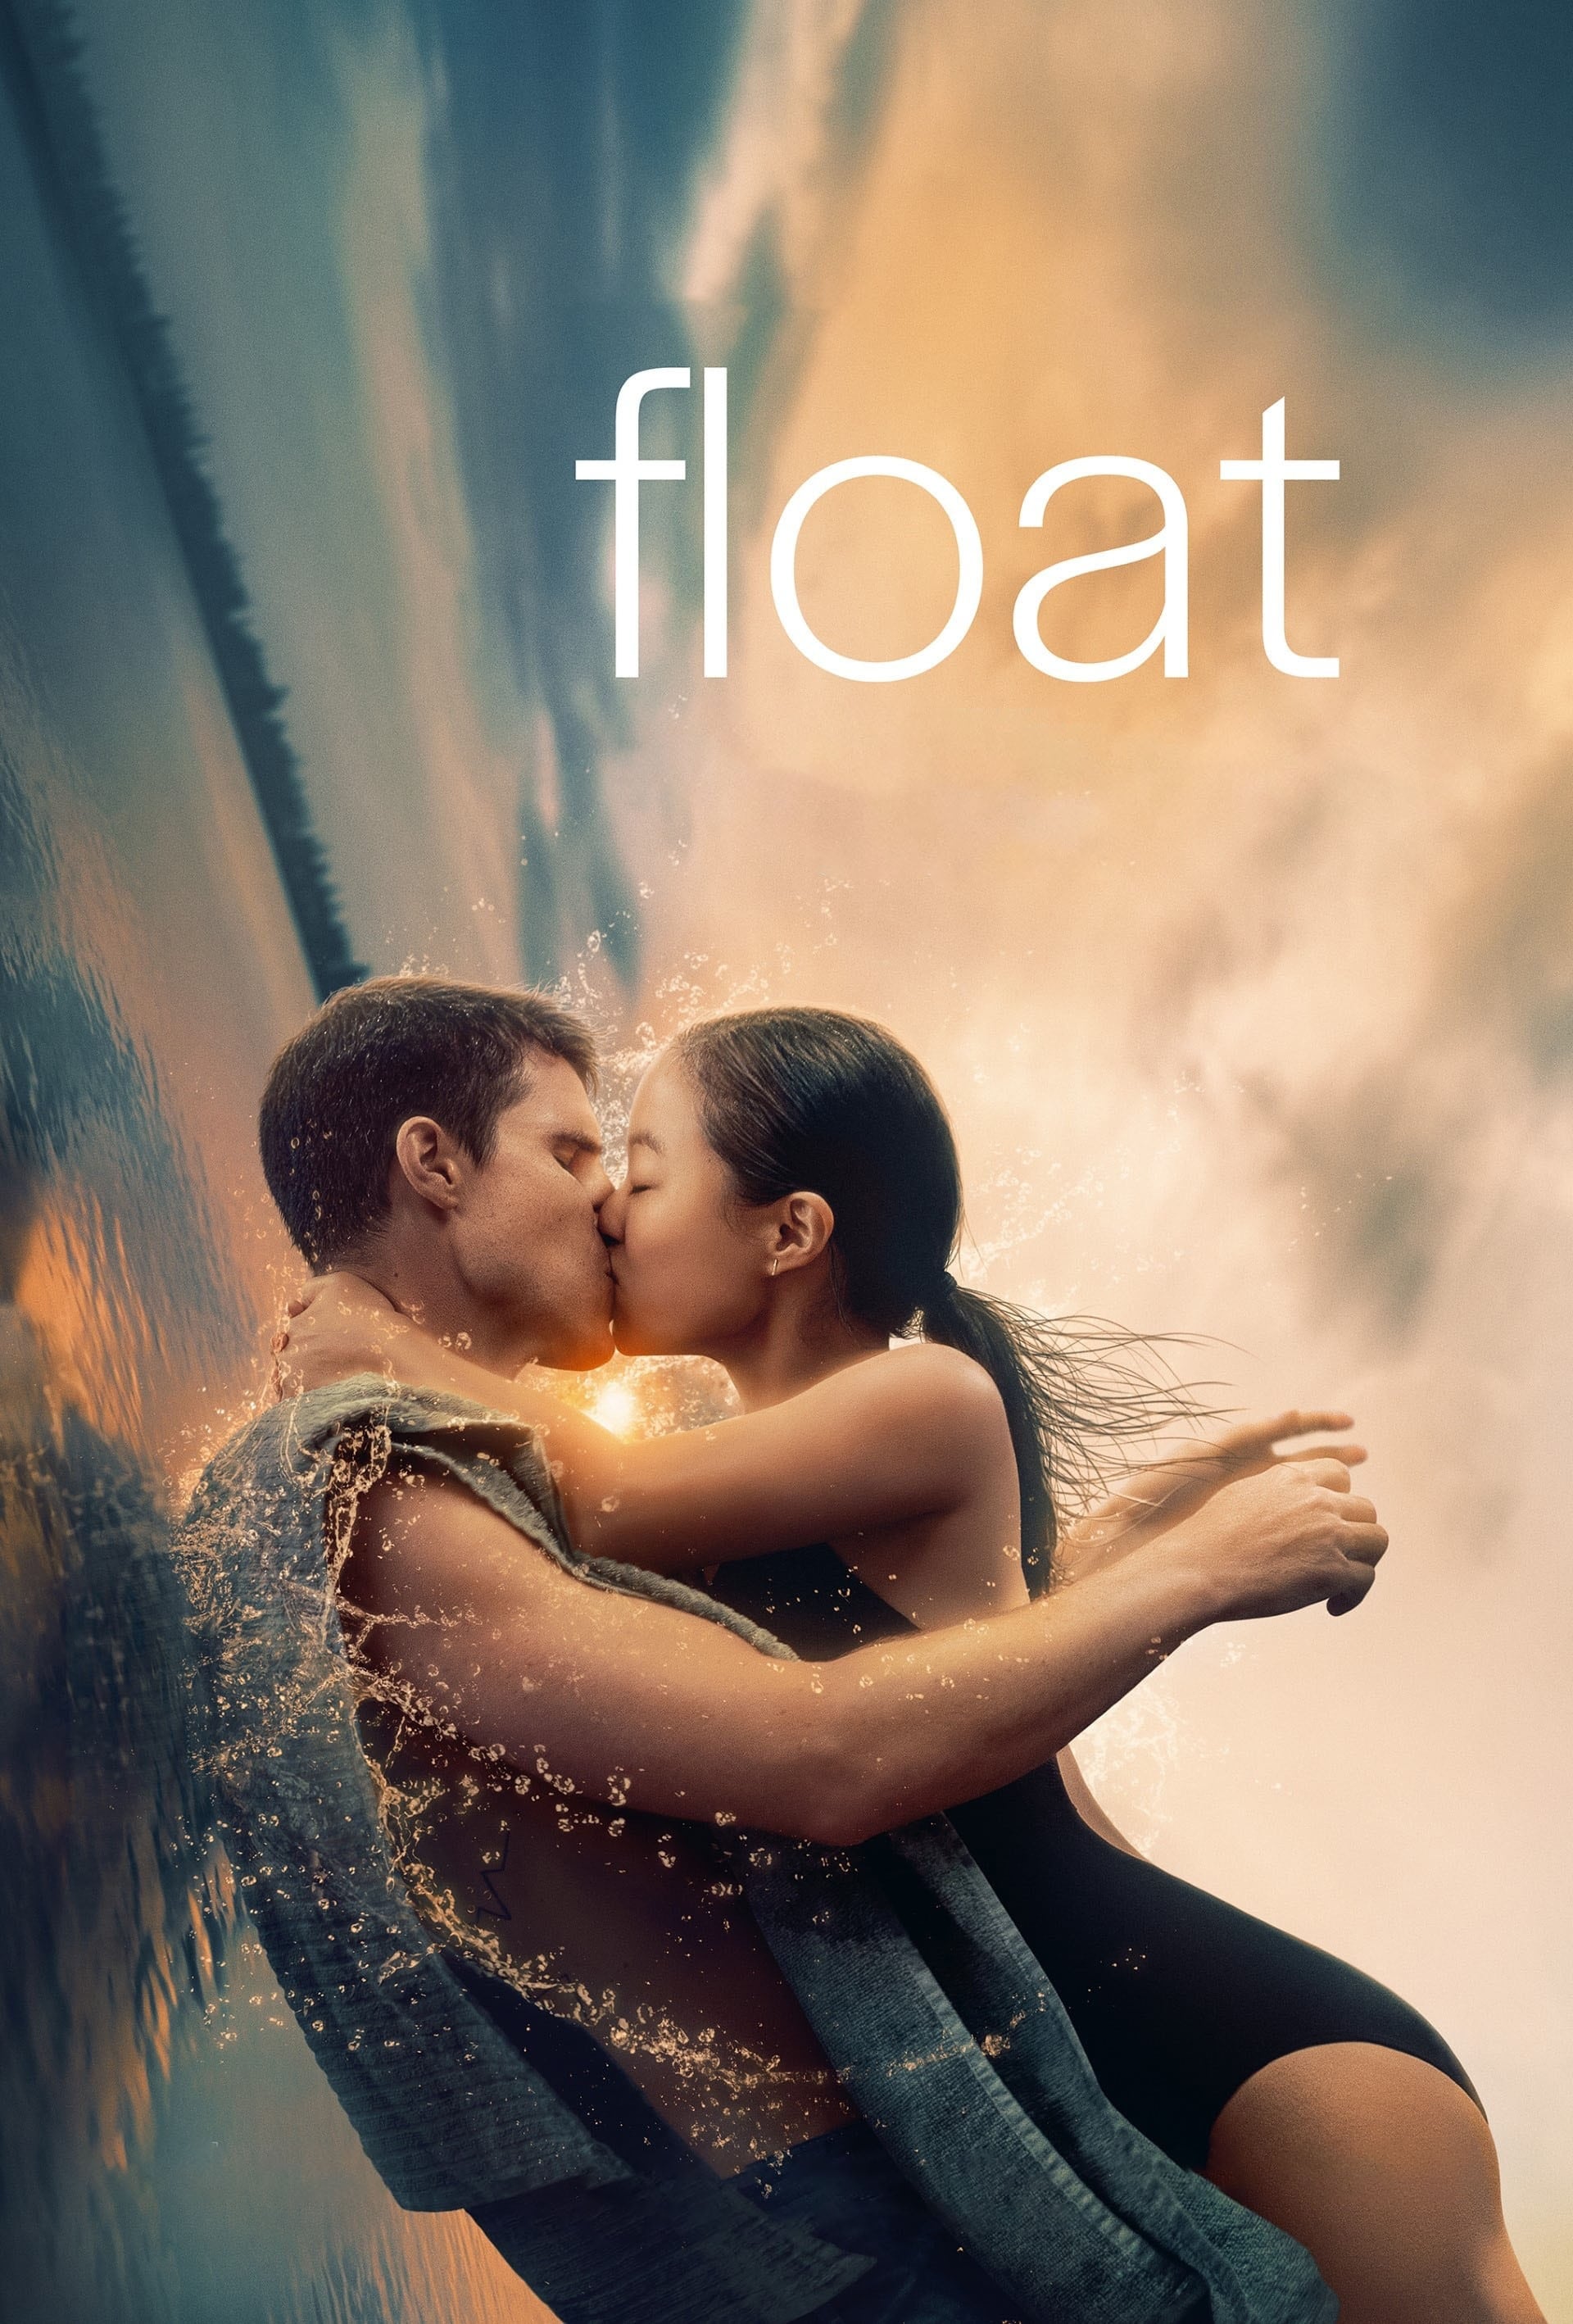 Poster for the movie "Float"